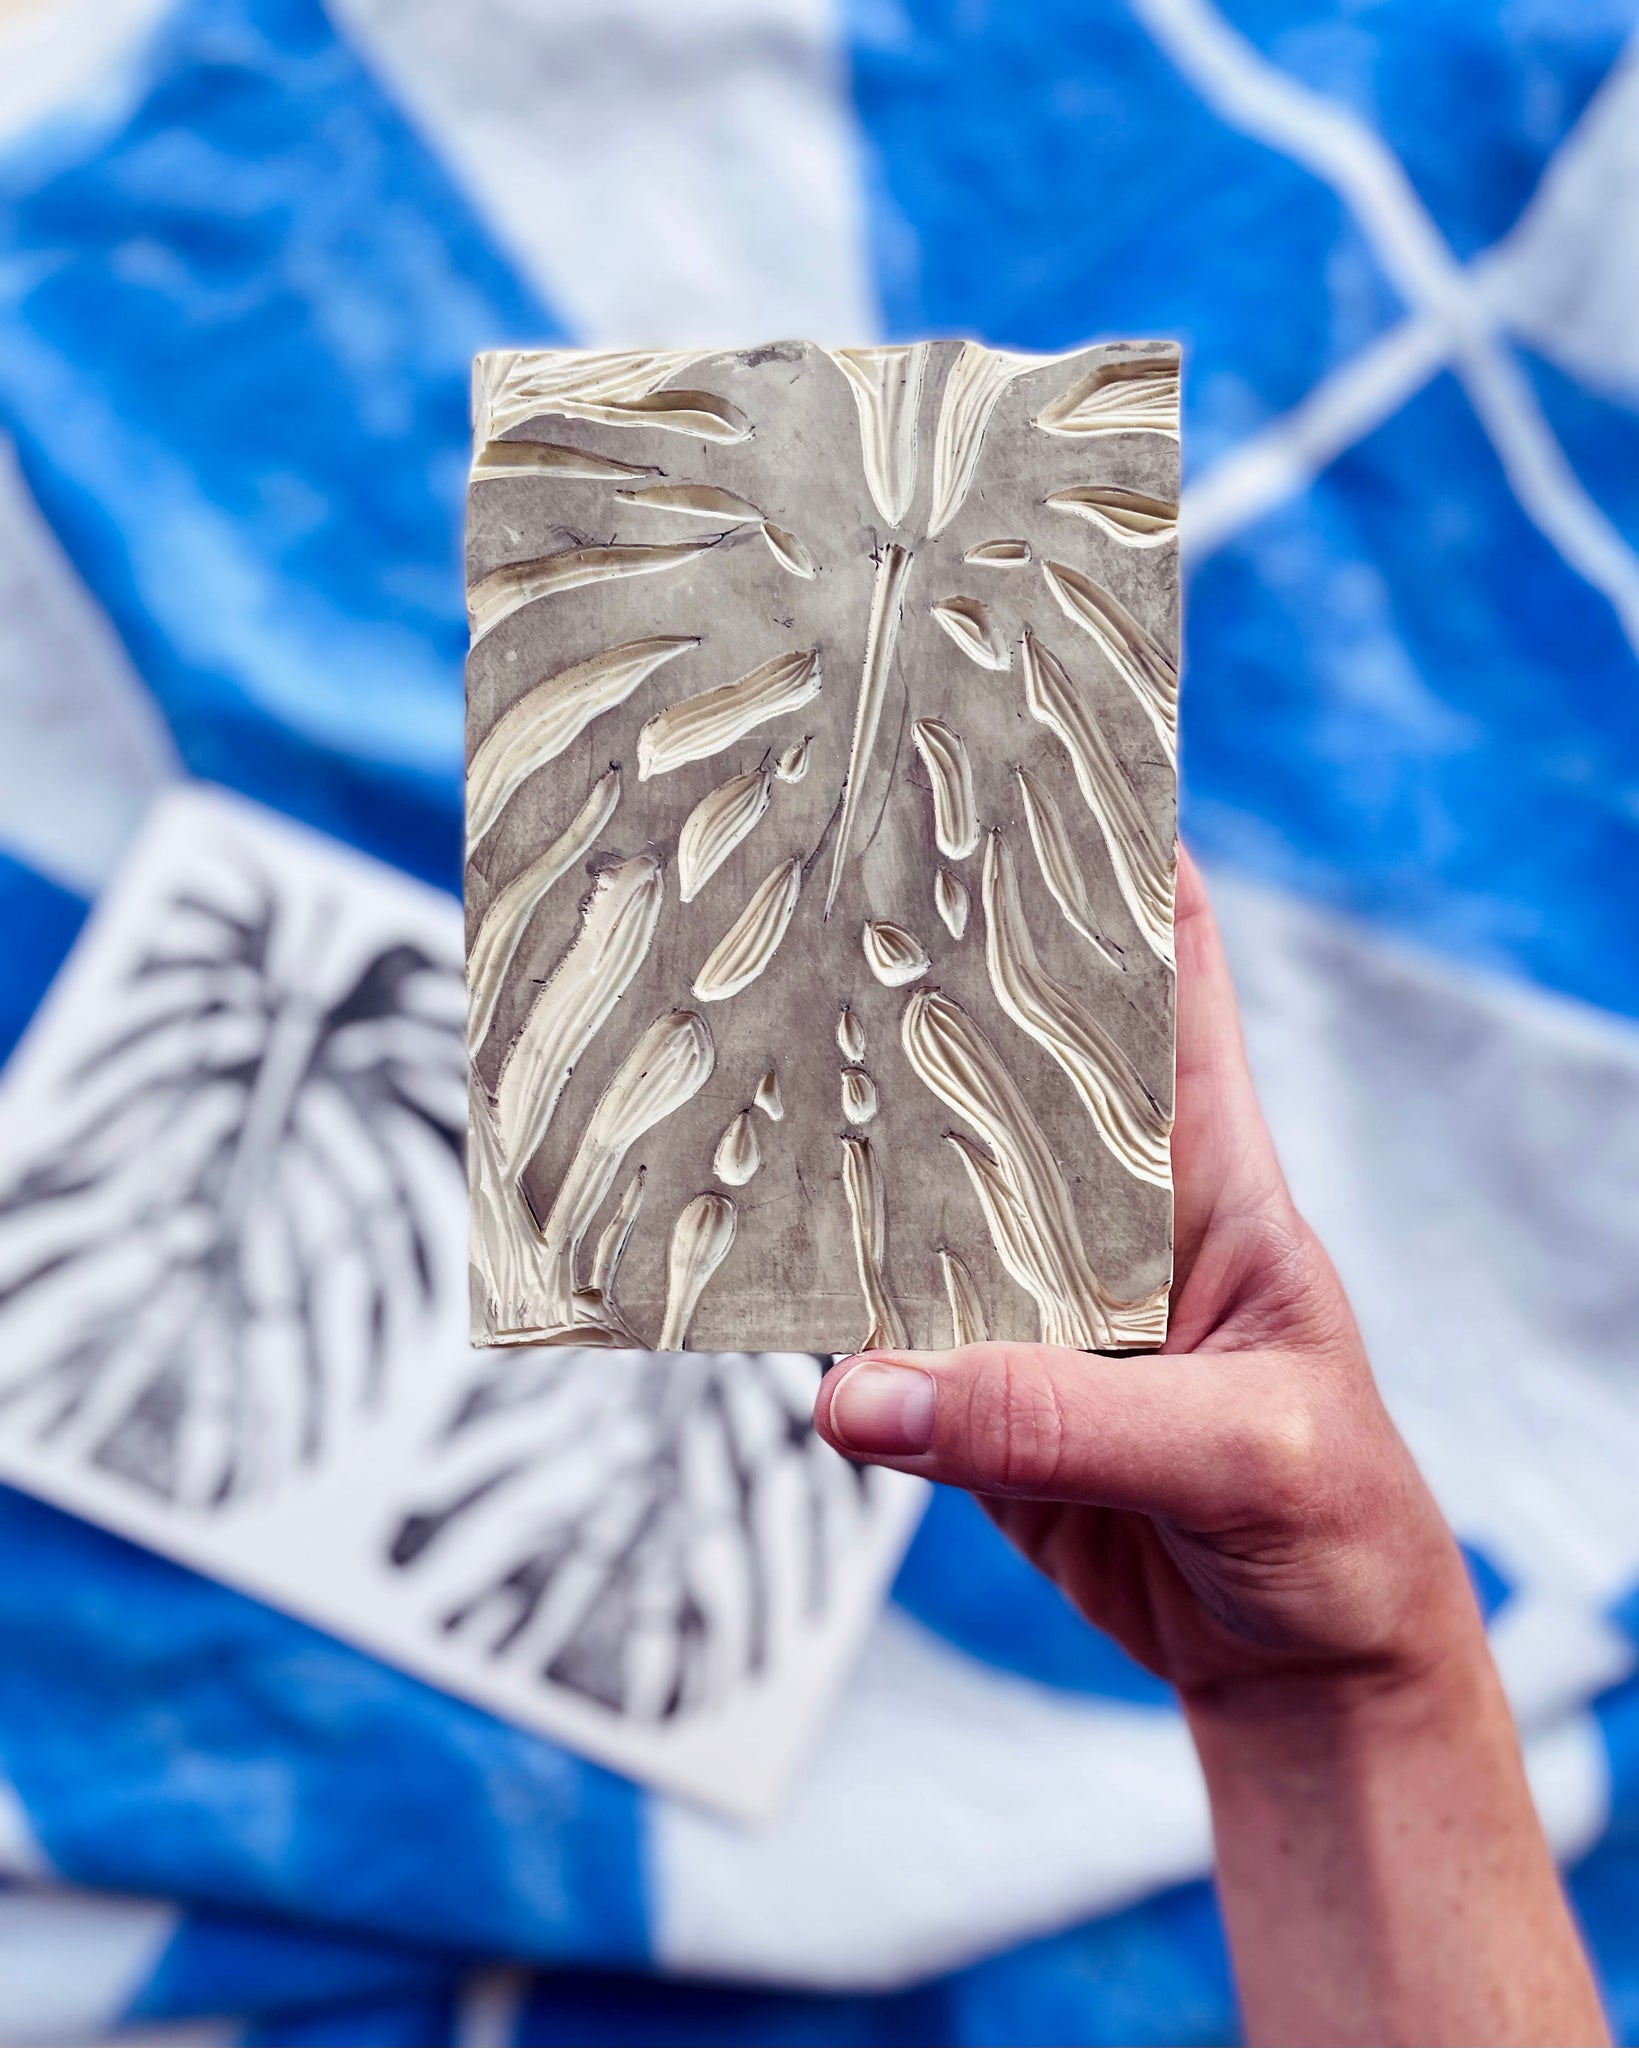 A hand holds the pattern of a block print block.